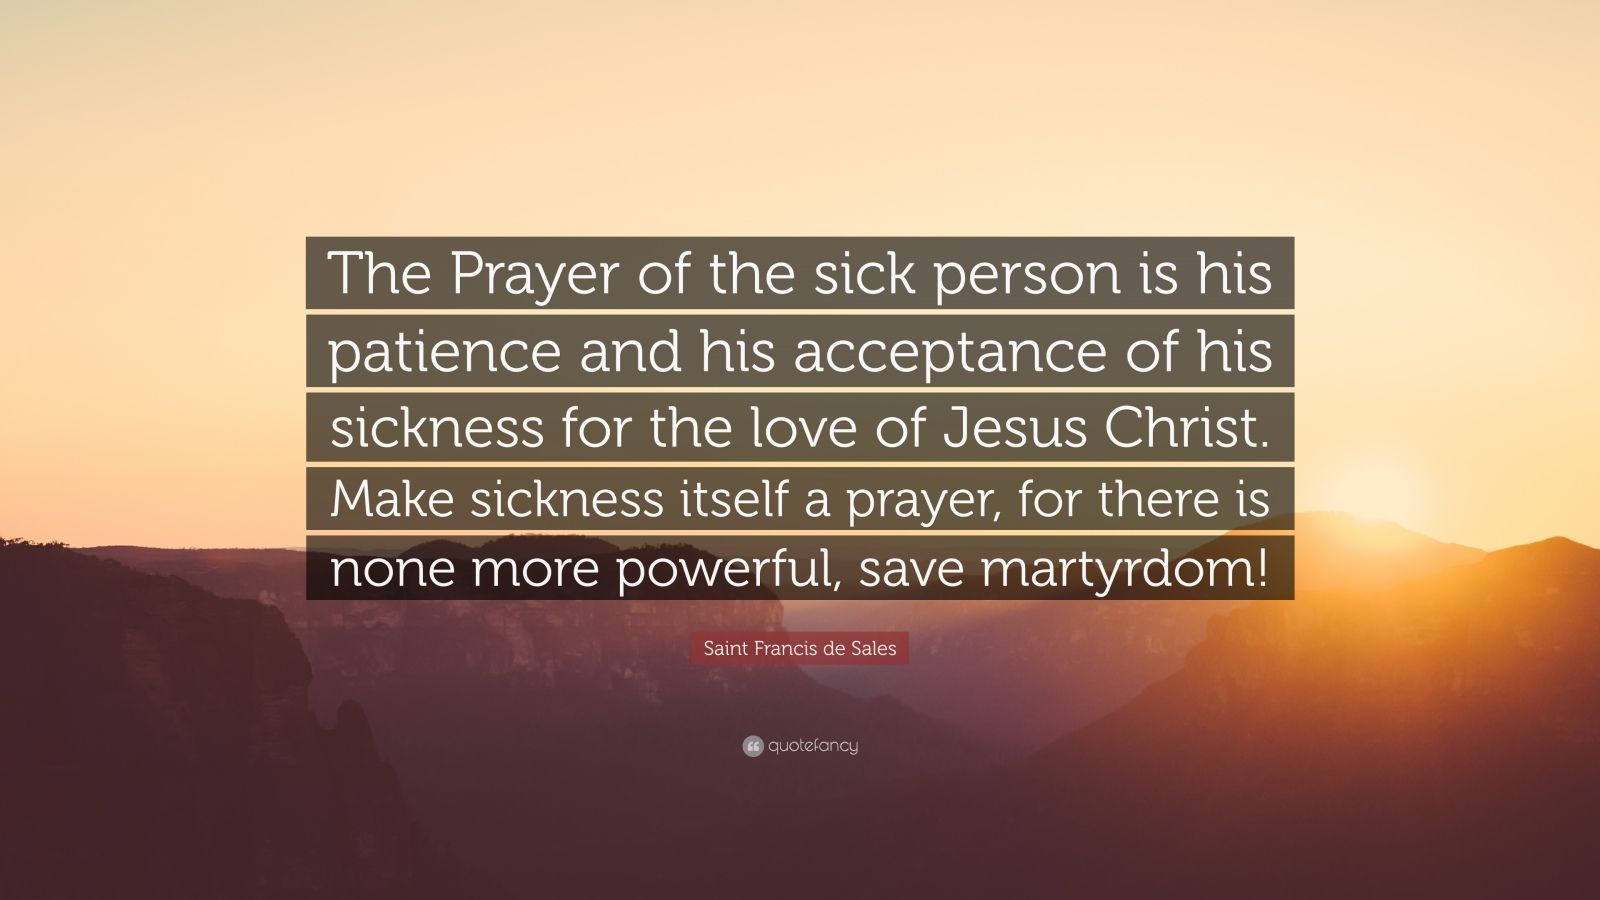 Saint Francis de Sales Quote “The Prayer of the sick person is his patience